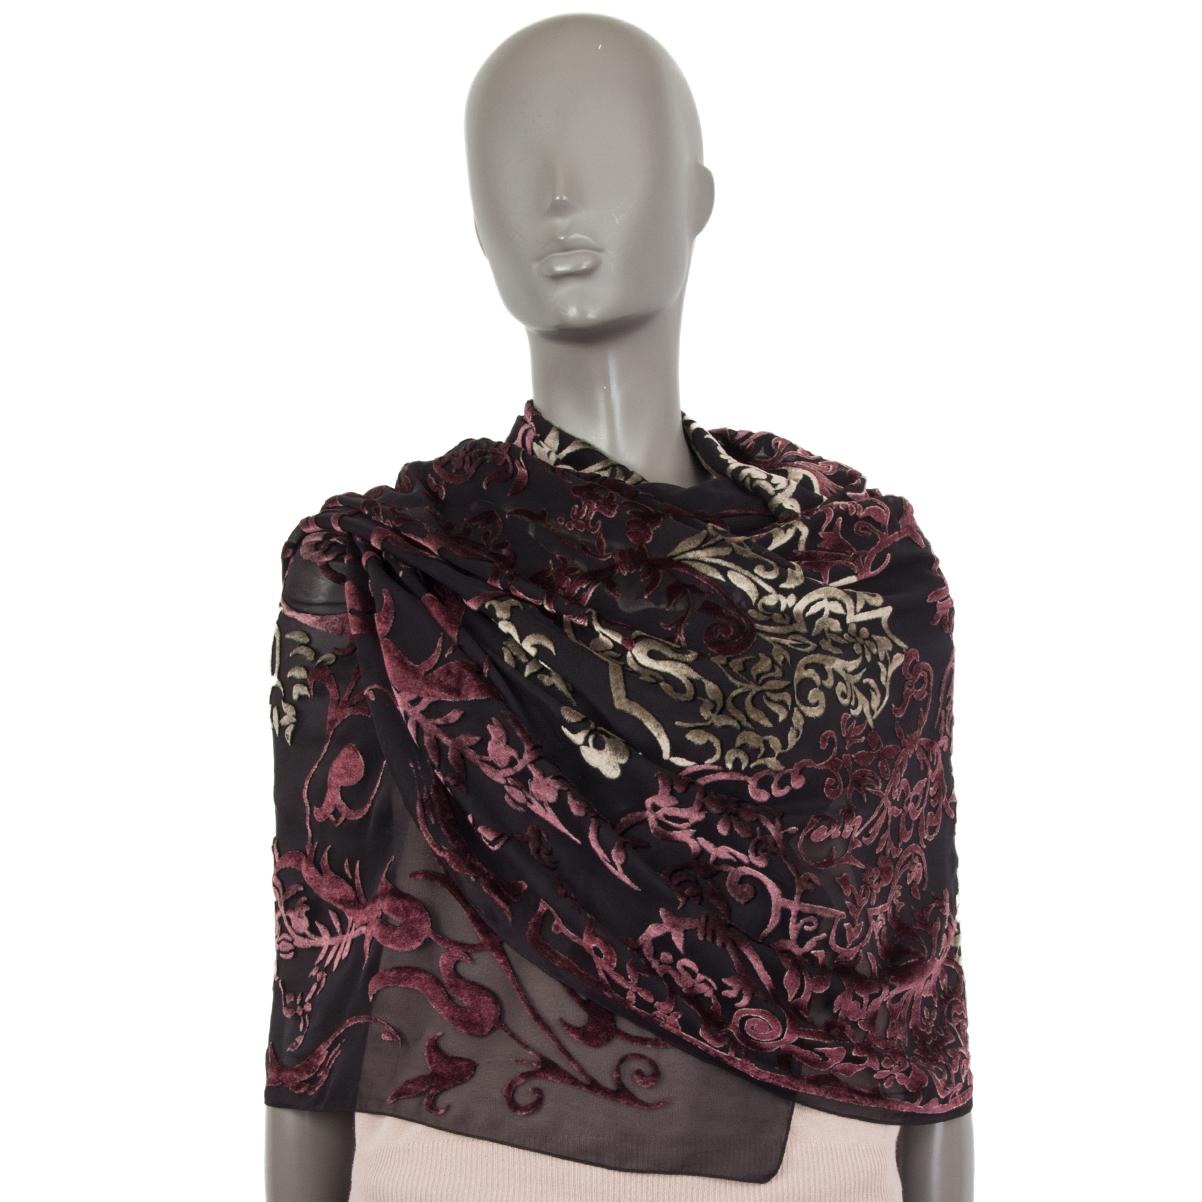 Christian Dior Devore scarf in black chiffon (viscose (82%) and silk (18%) with burgundy and pale olive velvet pattern. Has been worn and is in excellent condition.

Width 65cm (25.4in)
Length 175cm (68.3in)